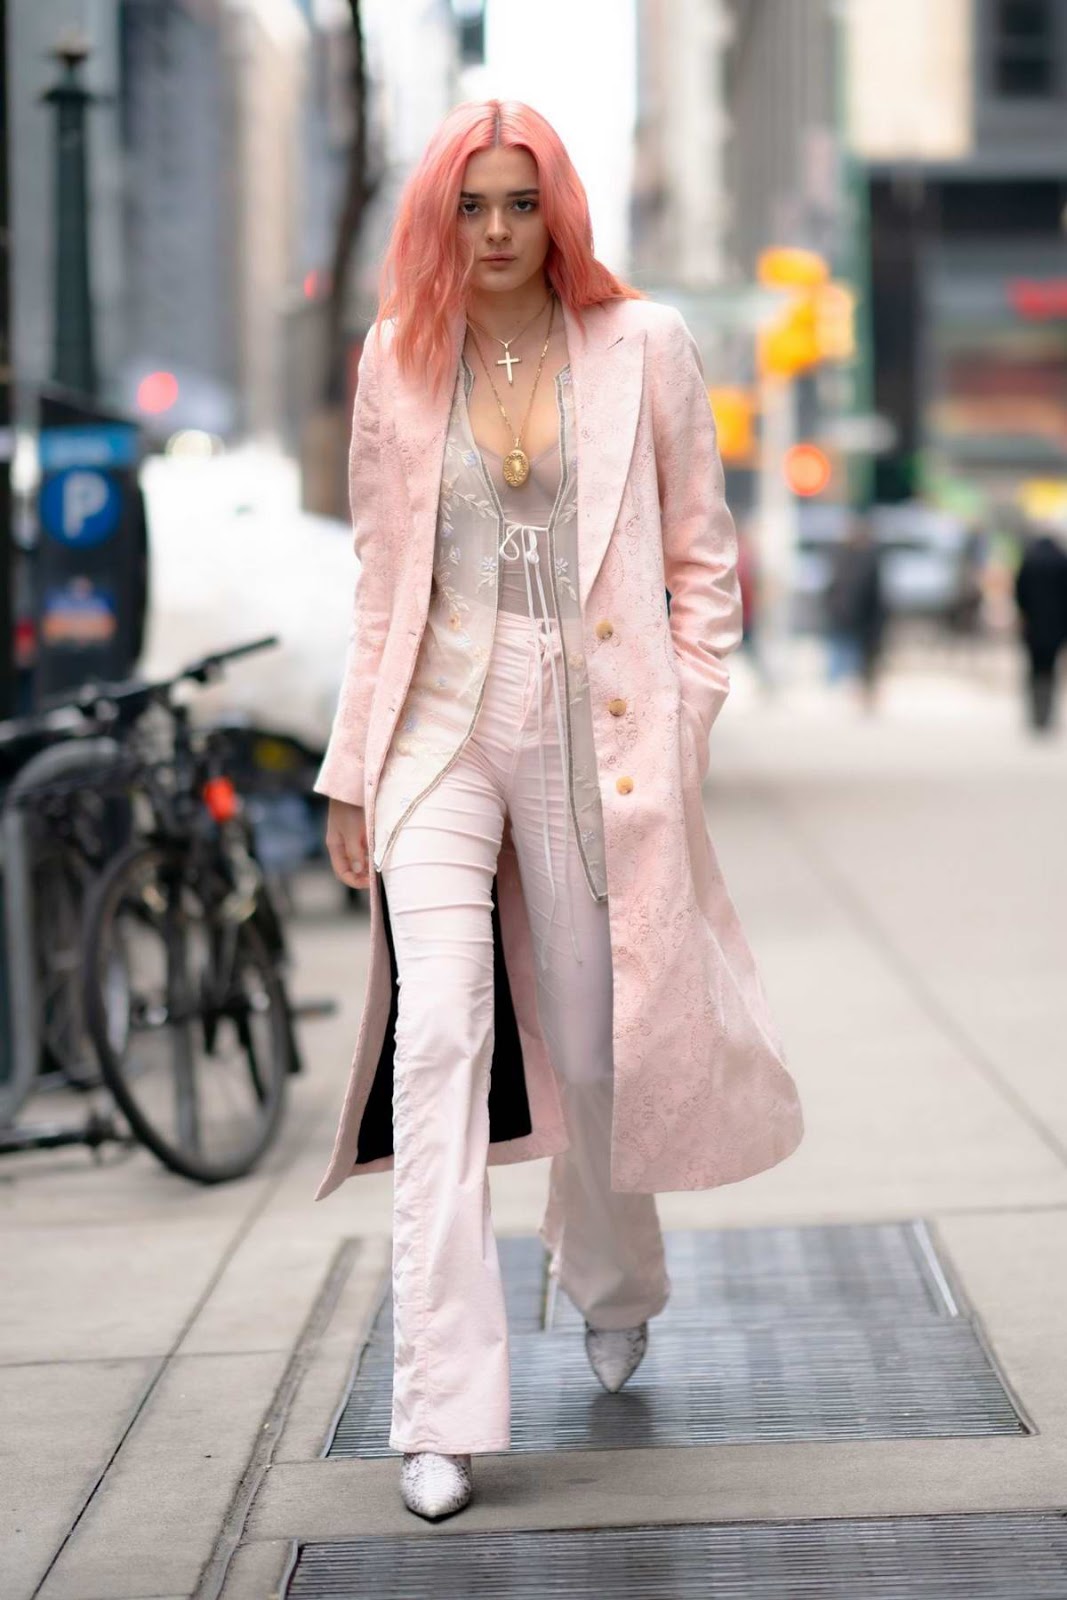 Charlotte Lawrence in Pink Ensemble Street Style Outfit in New York City